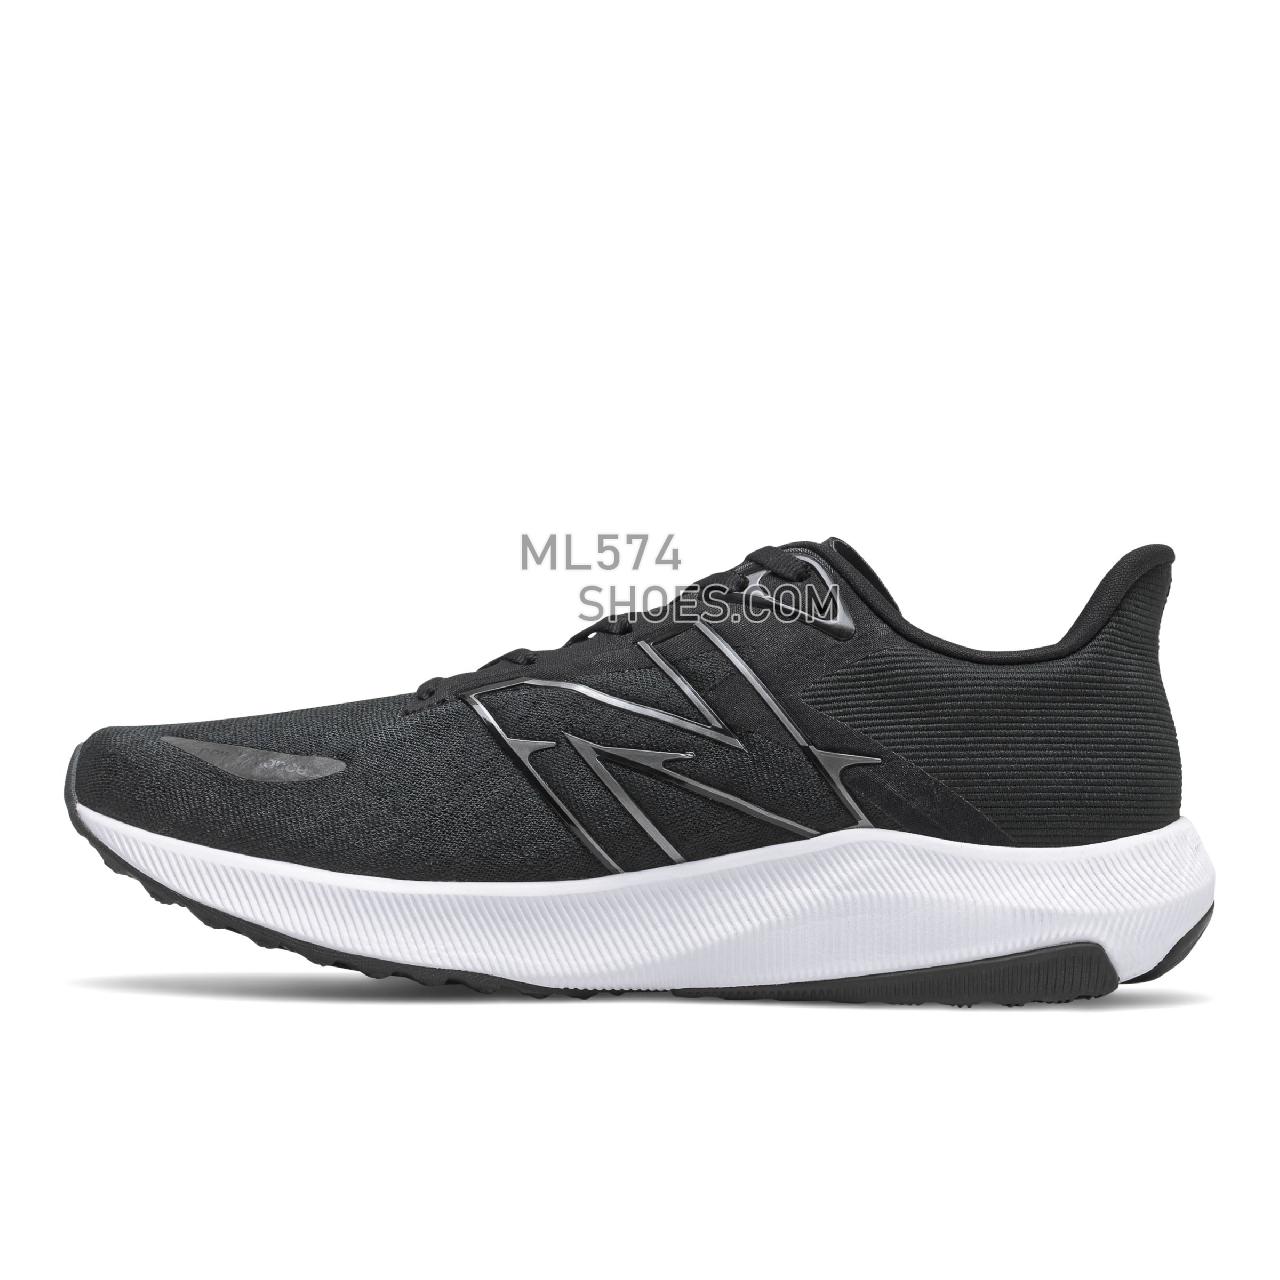 New Balance FuelCell Propel v3 - Men's Neutral Running - Black with White - MFCPRLK3